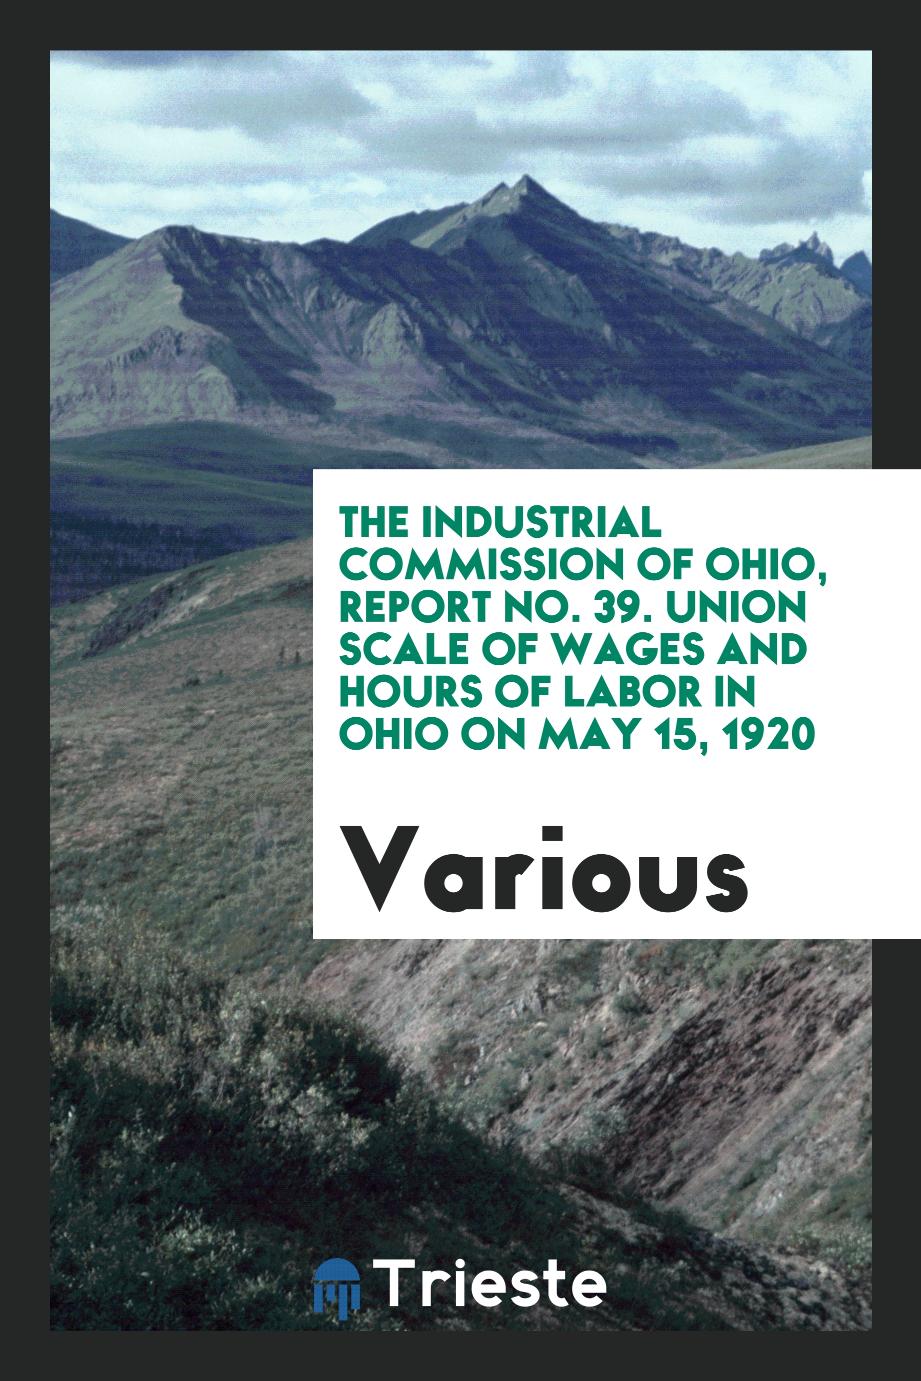 The Industrial Commission of Ohio, report No. 39. Union Scale of Wages and hours of labor in Ohio on May 15, 1920